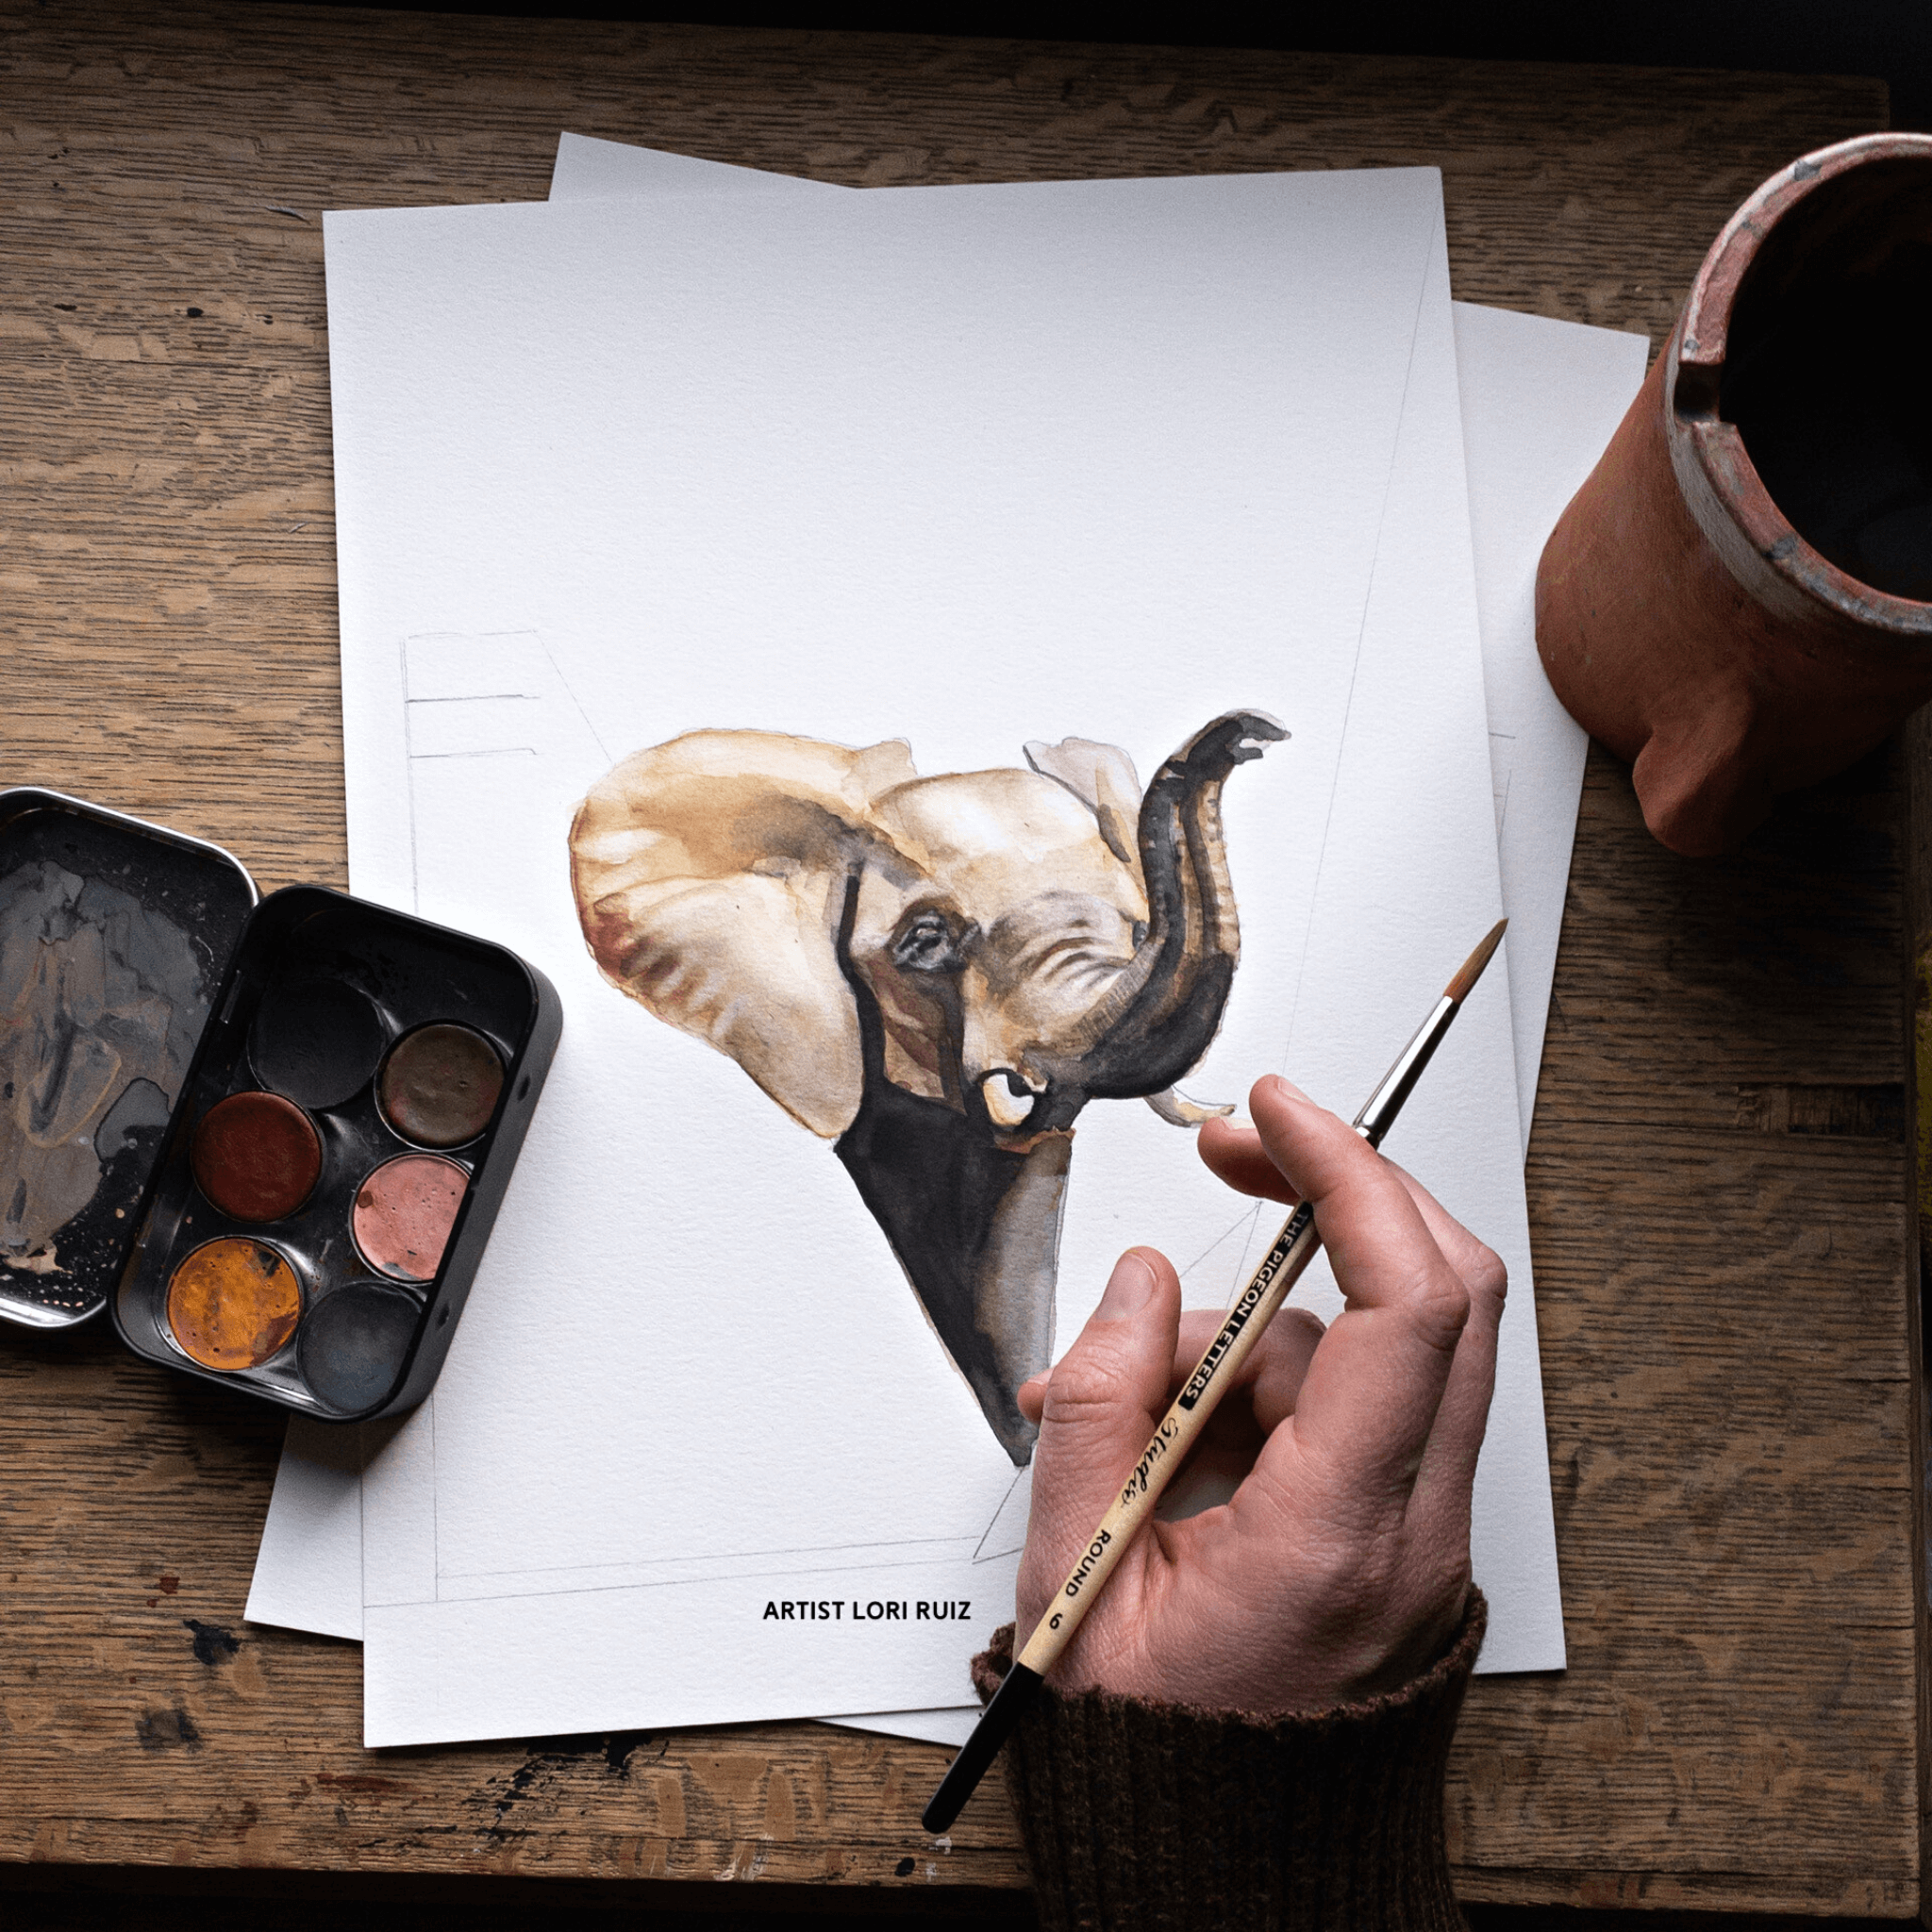 Painting of an elephant in watercolor by Lori Ruiz